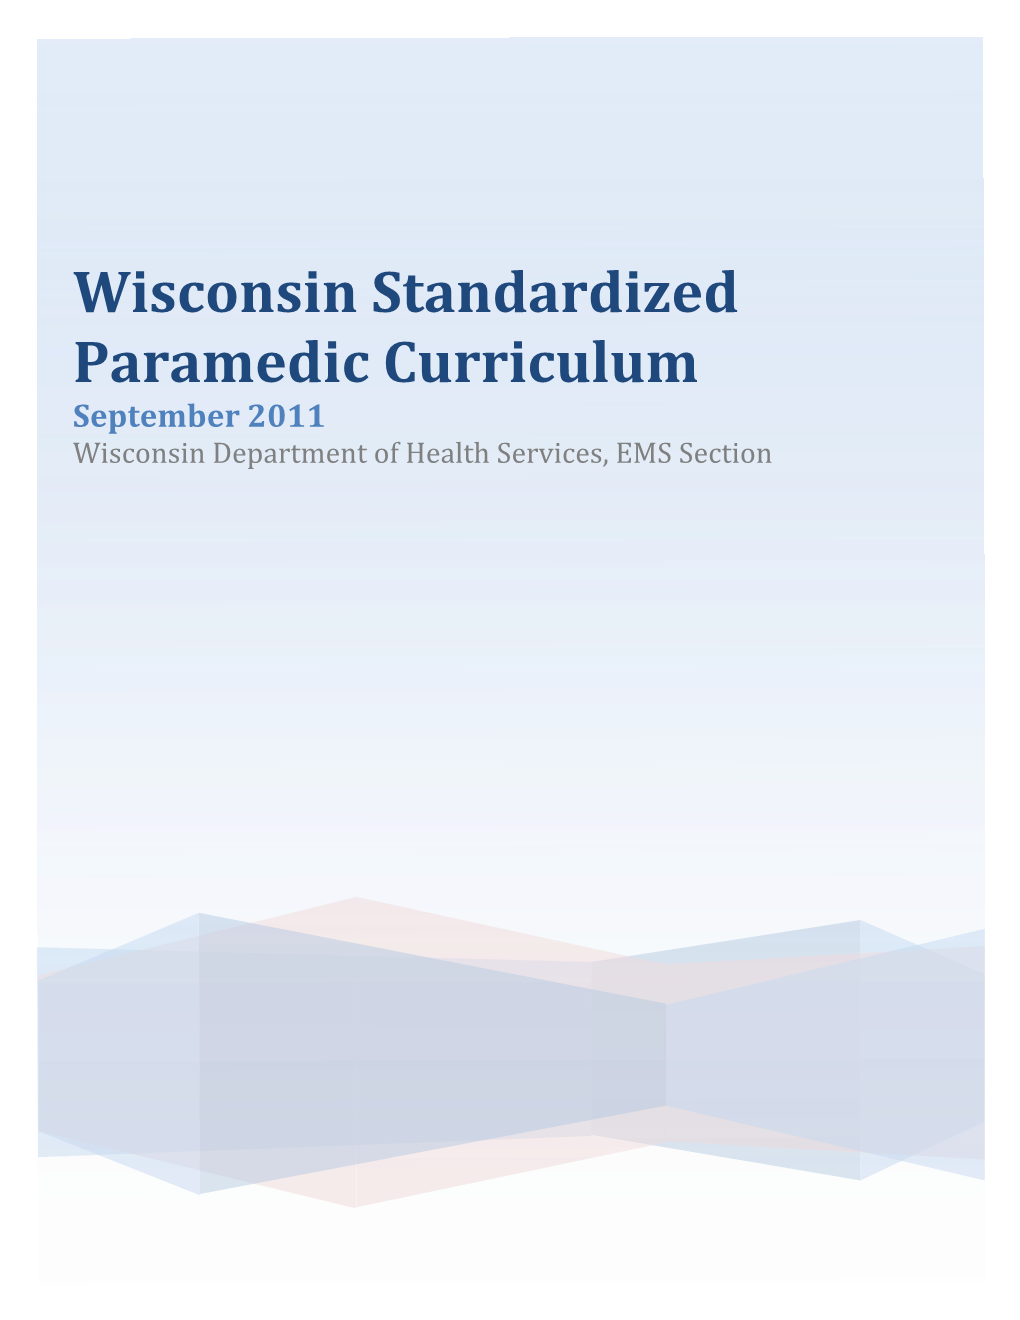 Wisconsin Standardized Paramedic Curriculum September 2011 Wisconsin Department of Health Services, EMS Section